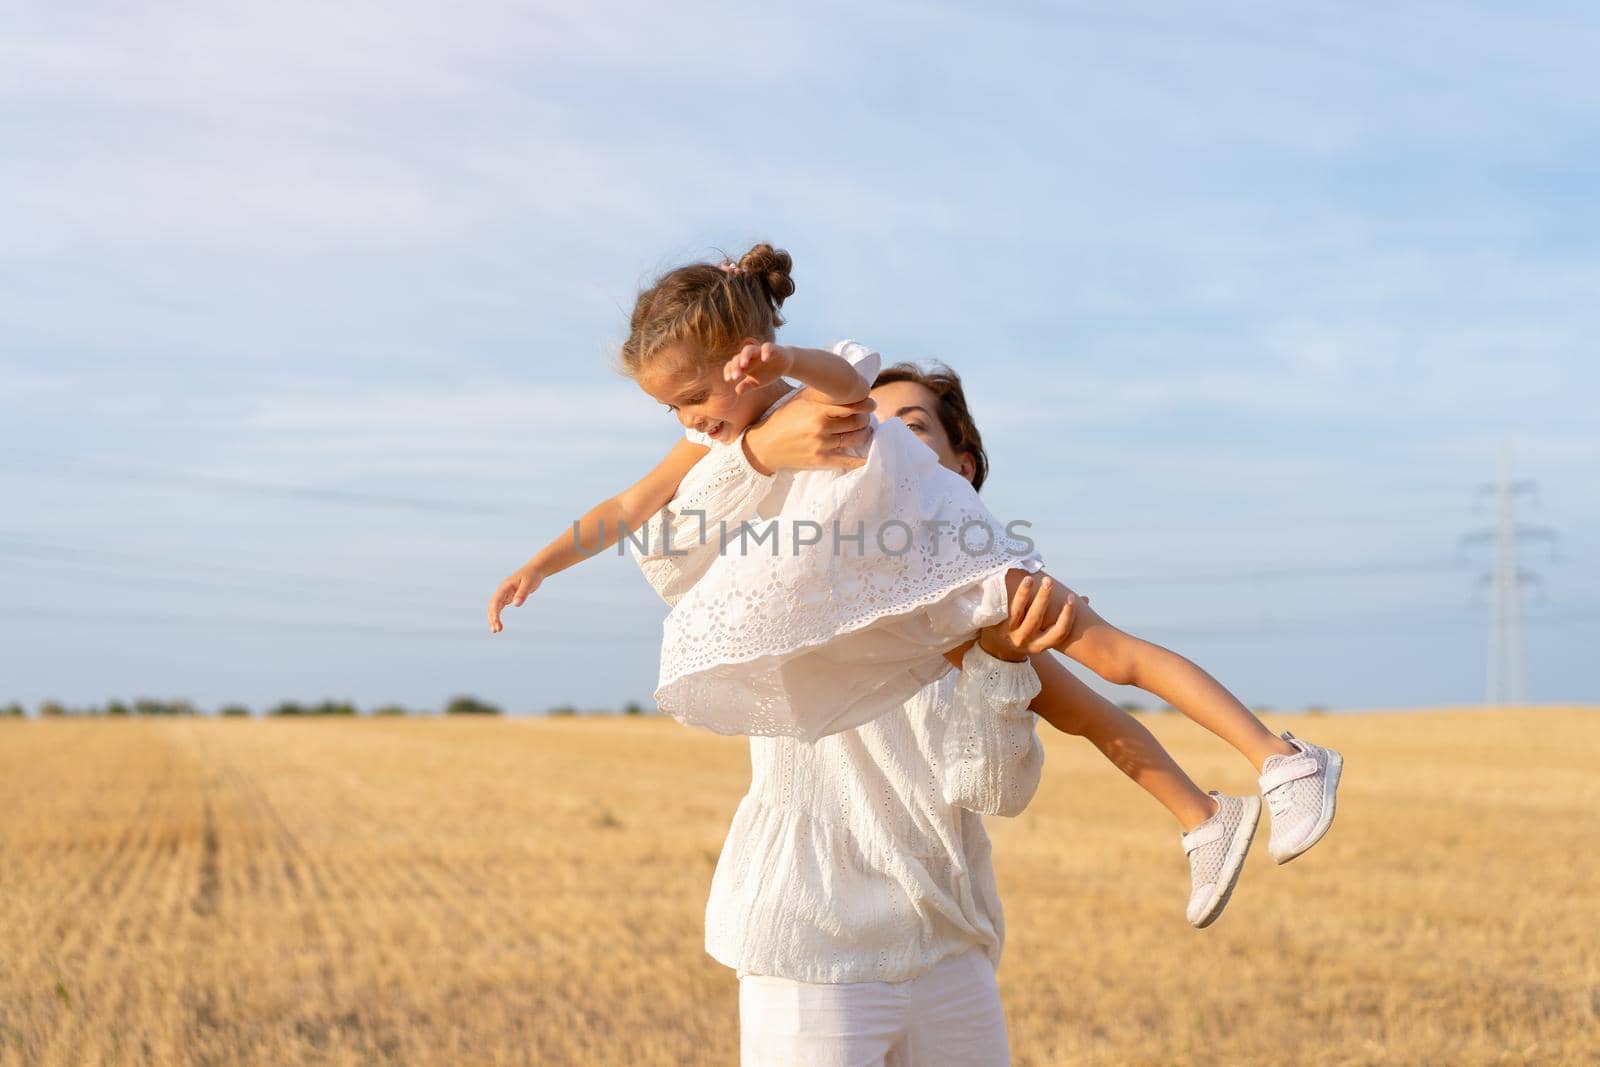 Mother throws up little daughter in air standing wheat field summer day blue sky background. Mom throw up little girl. Happy family concept. White dress. Happy childhood. 35 and 5 years female outdoor